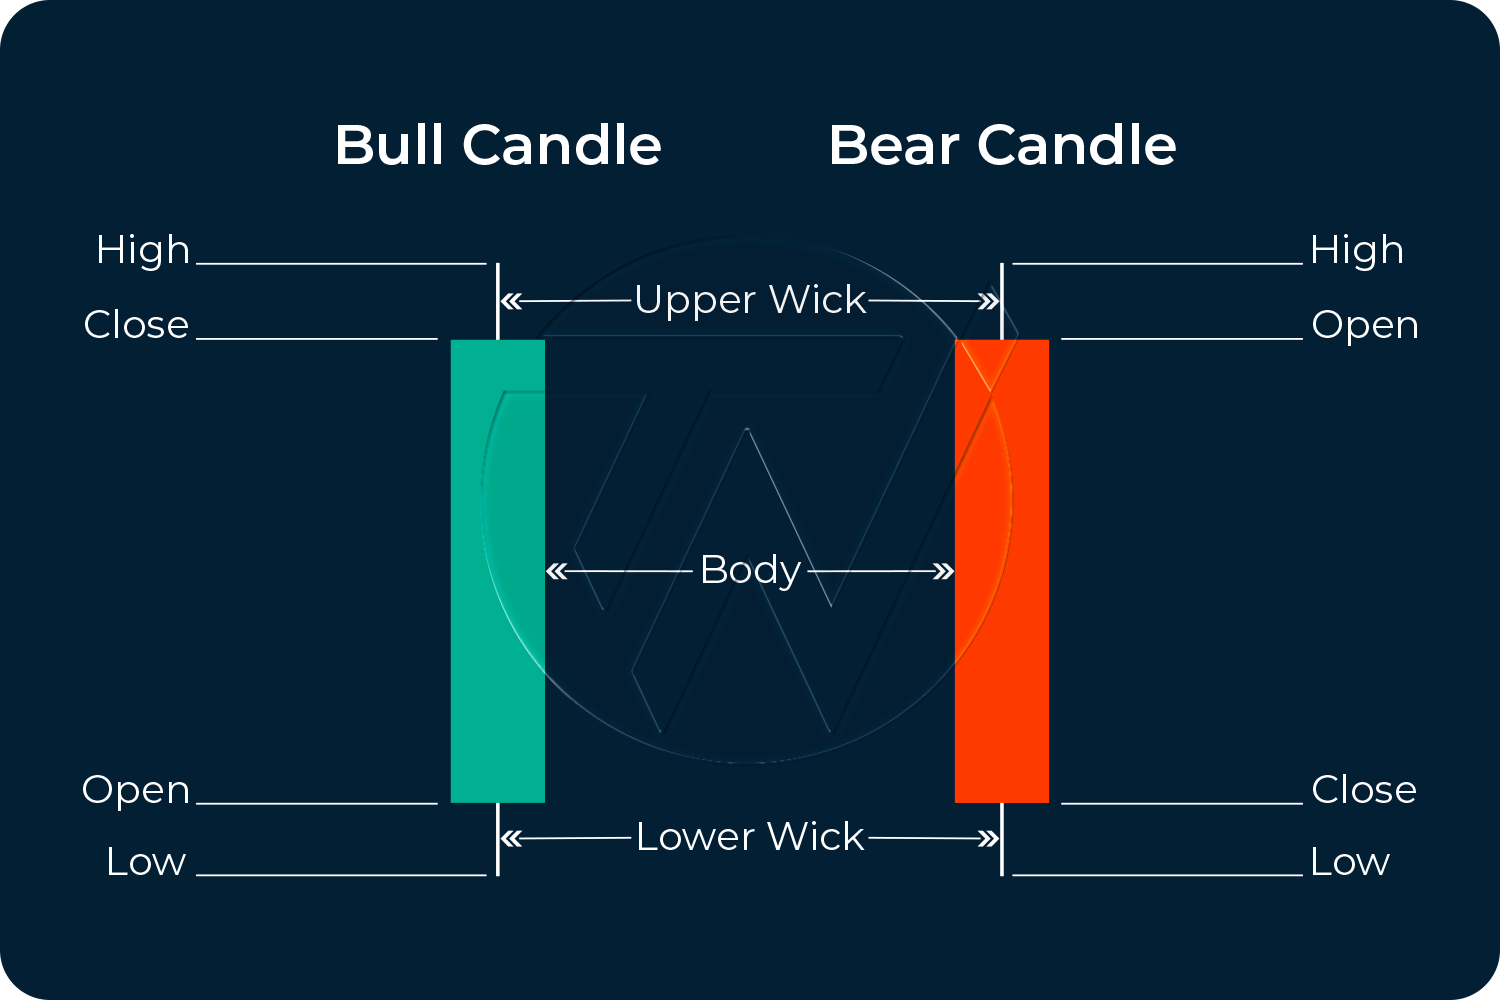 Illustration showing bull and bear candle body, open, close and wick structure